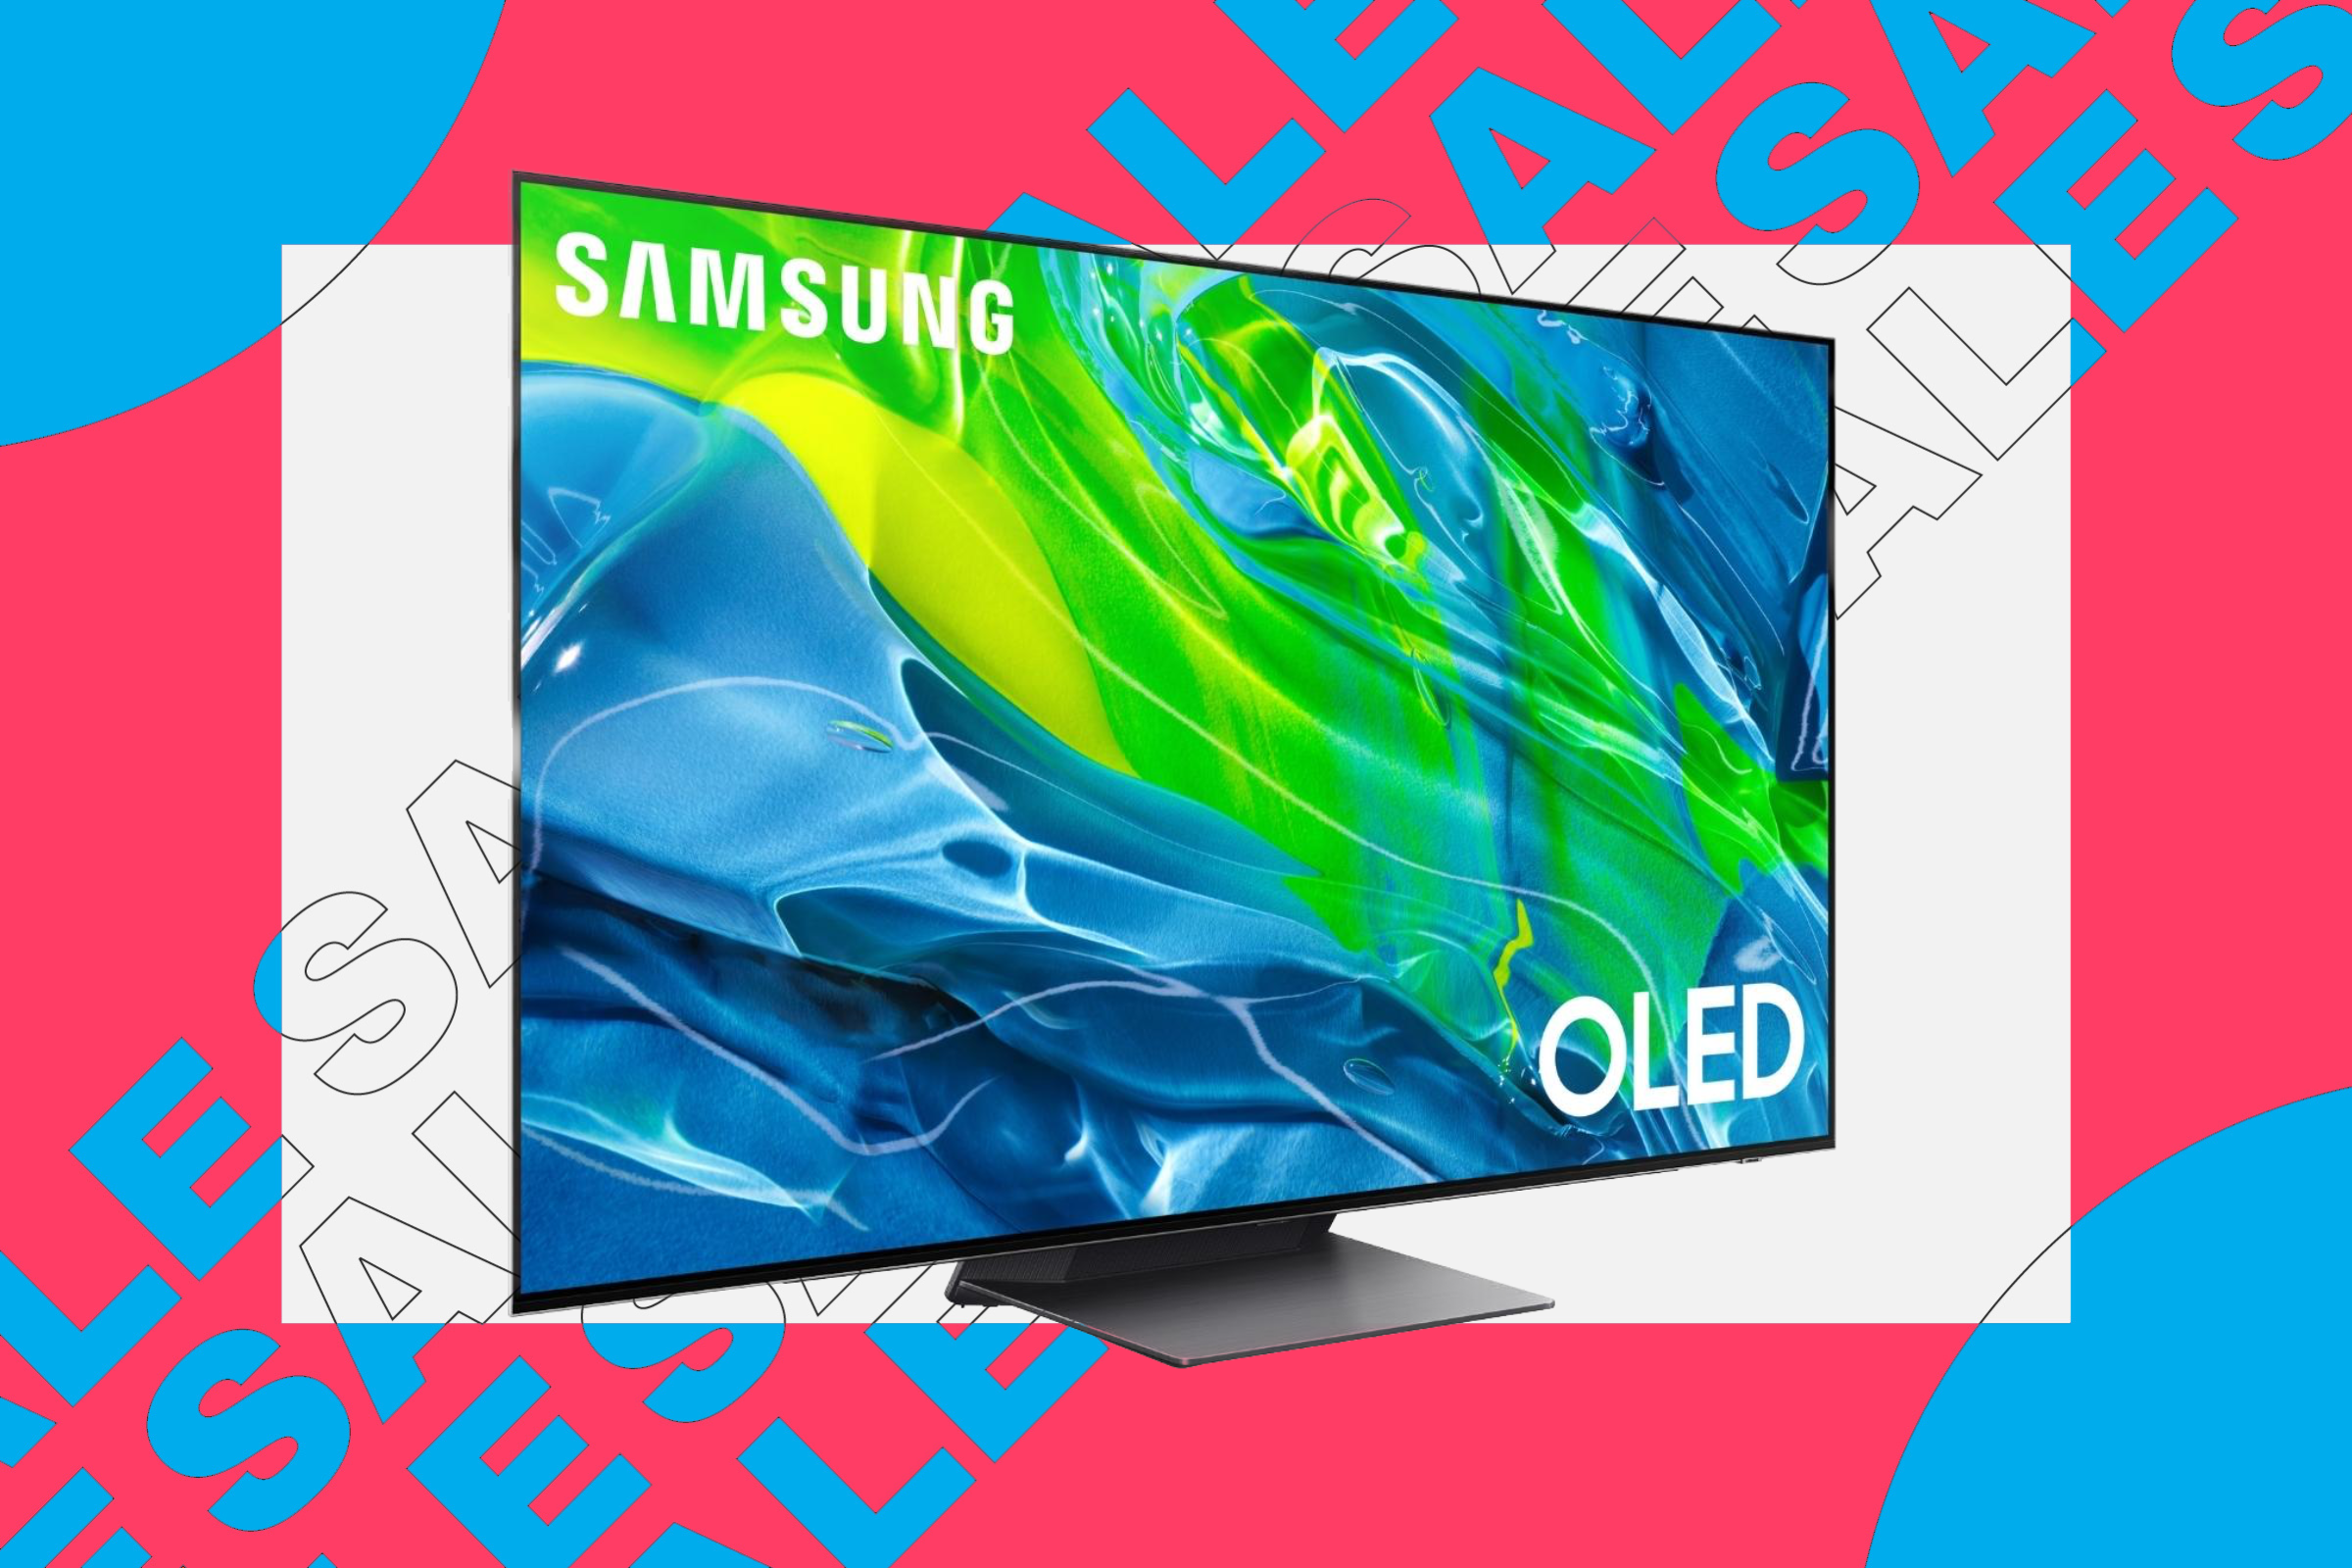 Samsung is still offering $1,000 off one its best OLED TVs for Black Friday